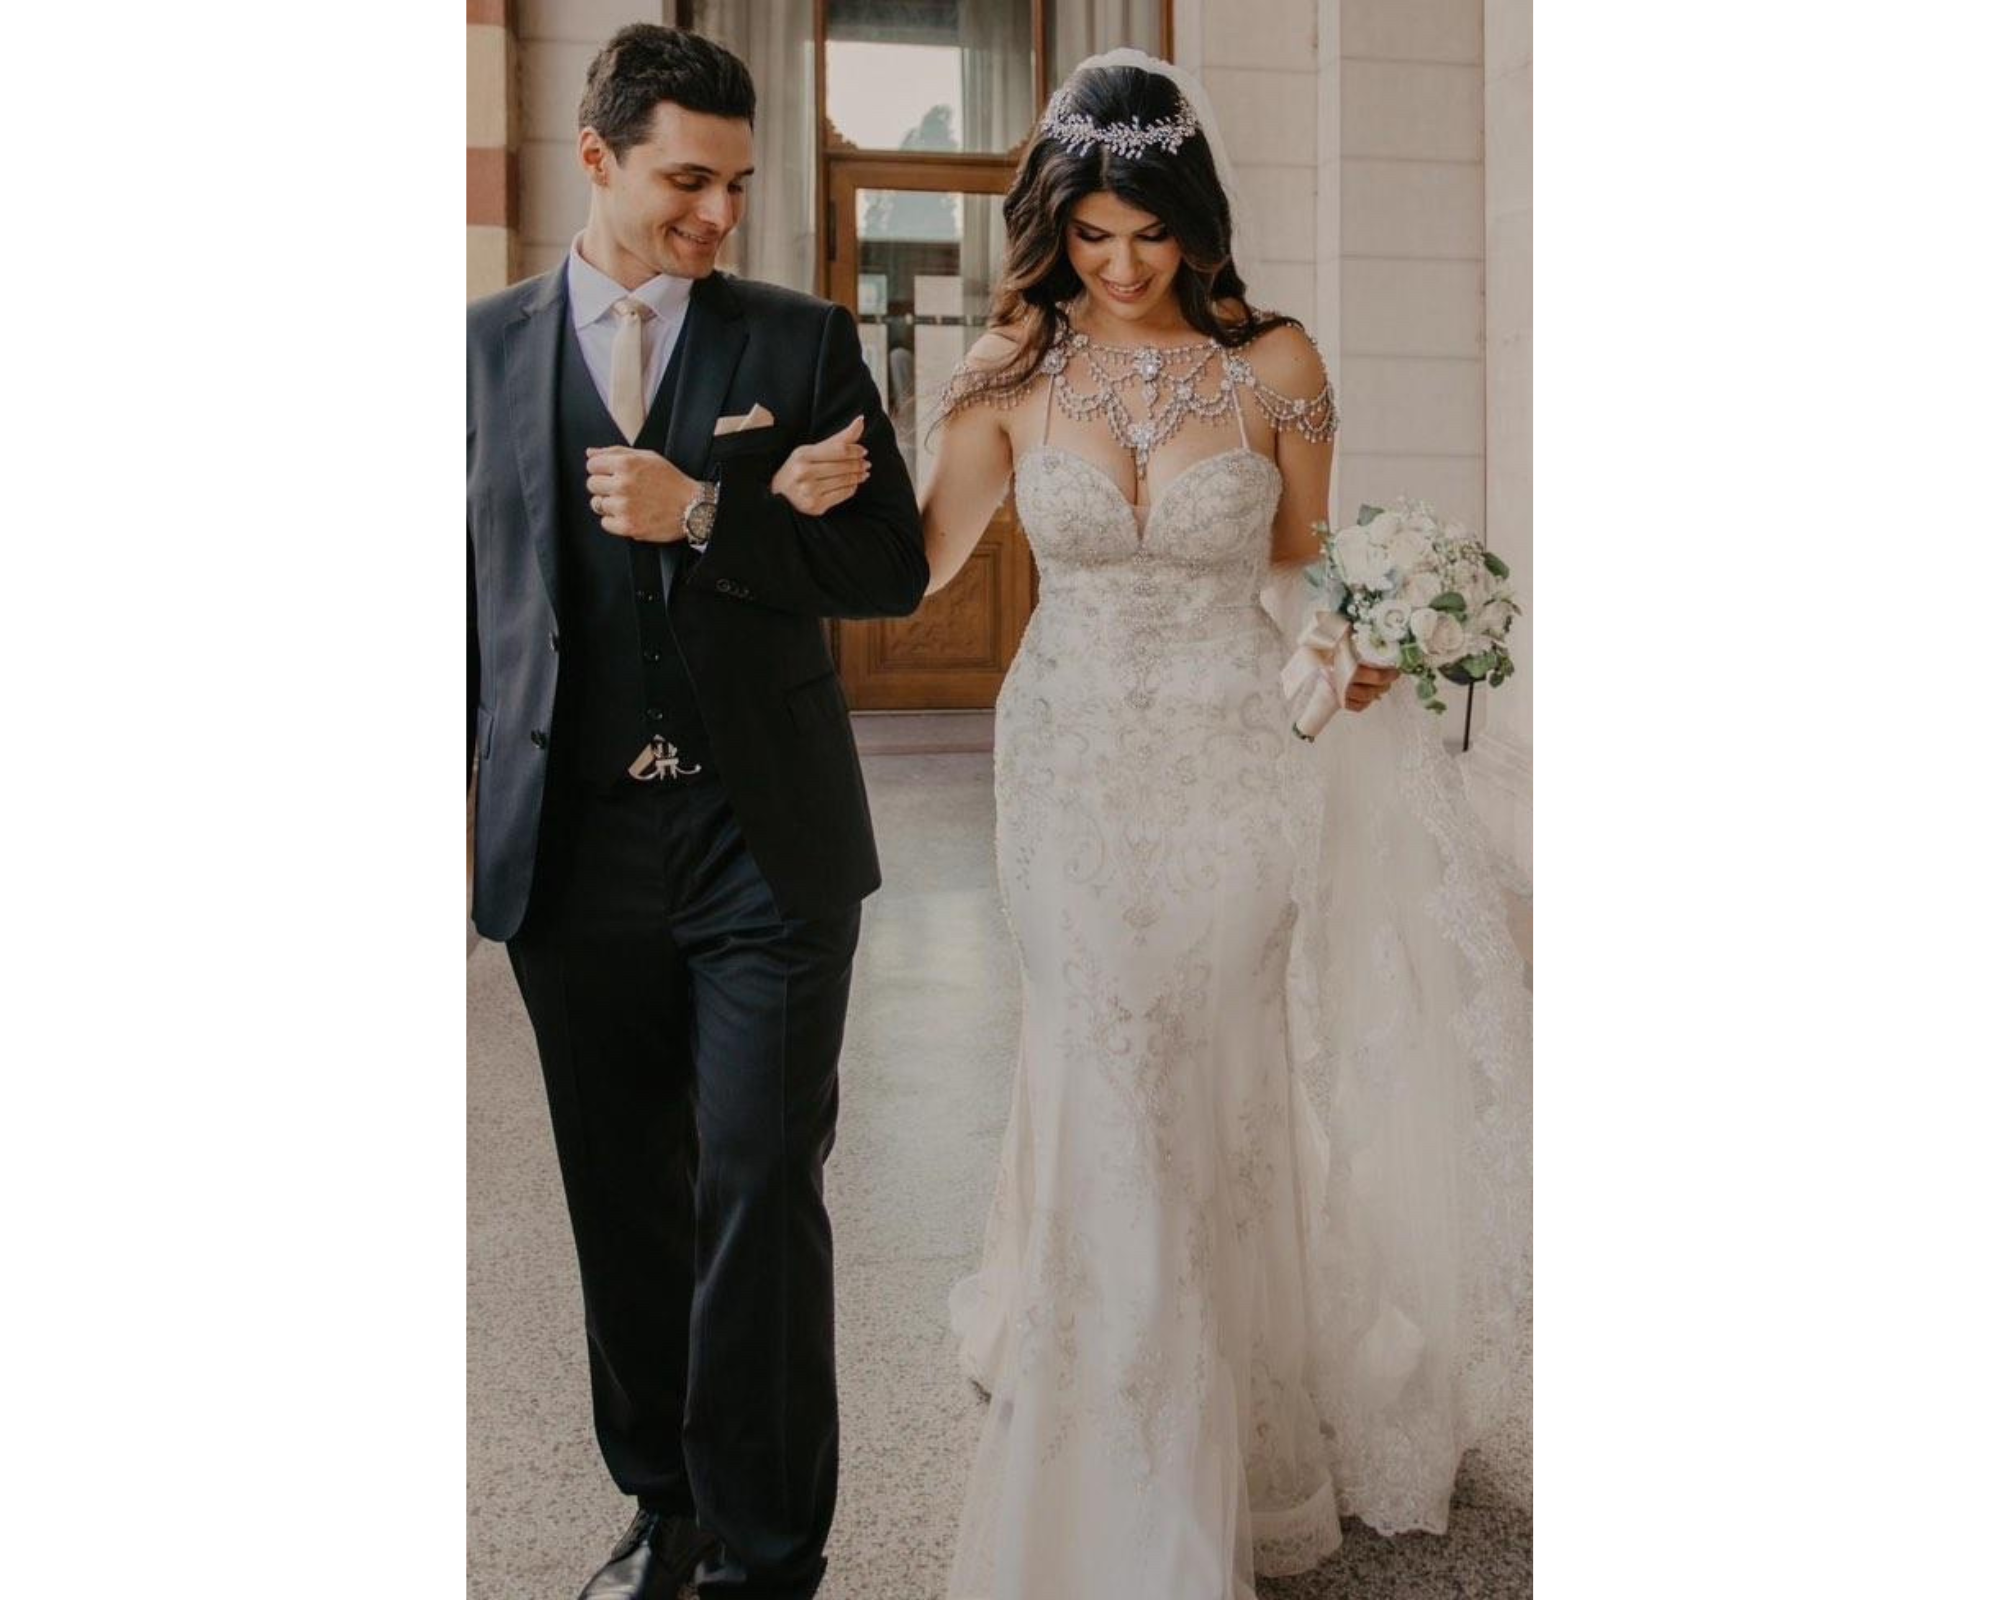 Our bride walking with her groom. She’s wearing her lace dress, Swarovski crystal wedding dress jewelry, and a wedding headpiece.